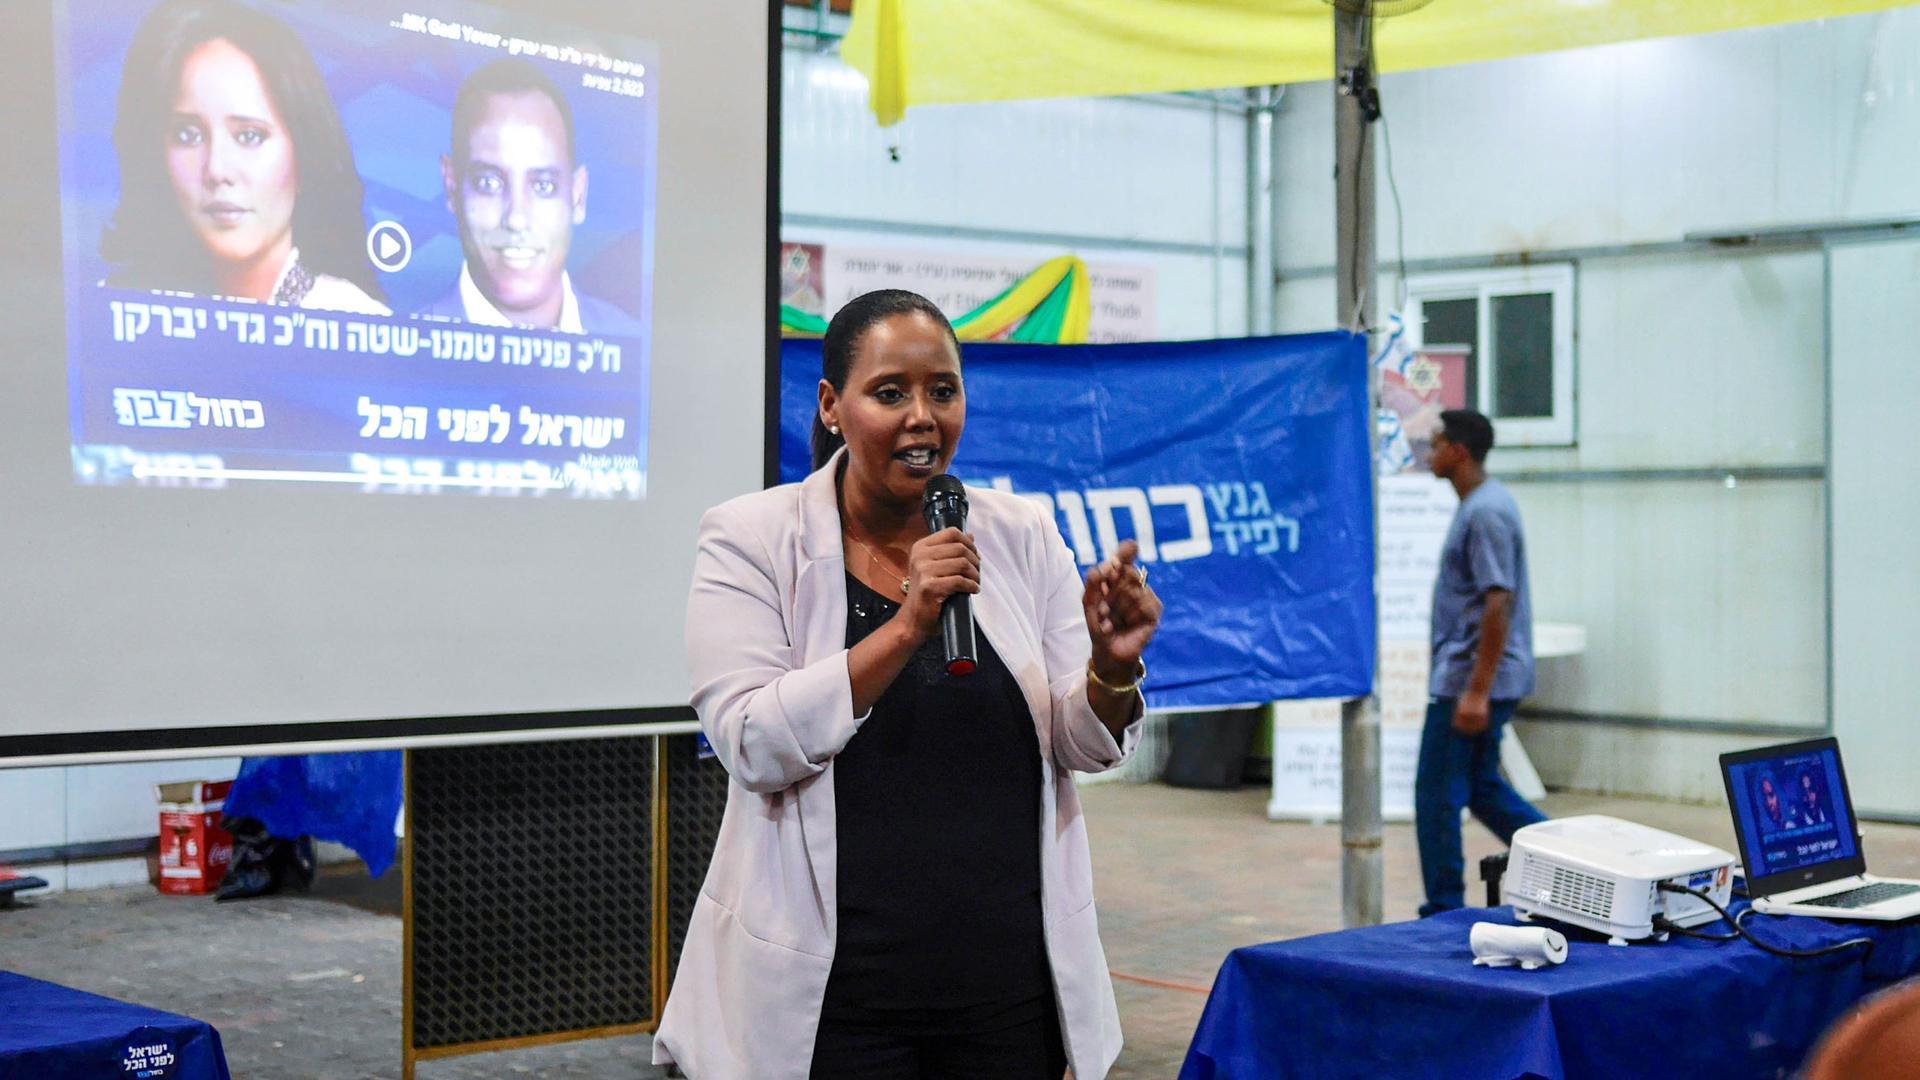 Pnina Tomano-Shata spoke at a town hall meeting for Ethiopian Israeli voters in the town of Or Yehuda ahead of Israel's national election on September 17, 2019.  